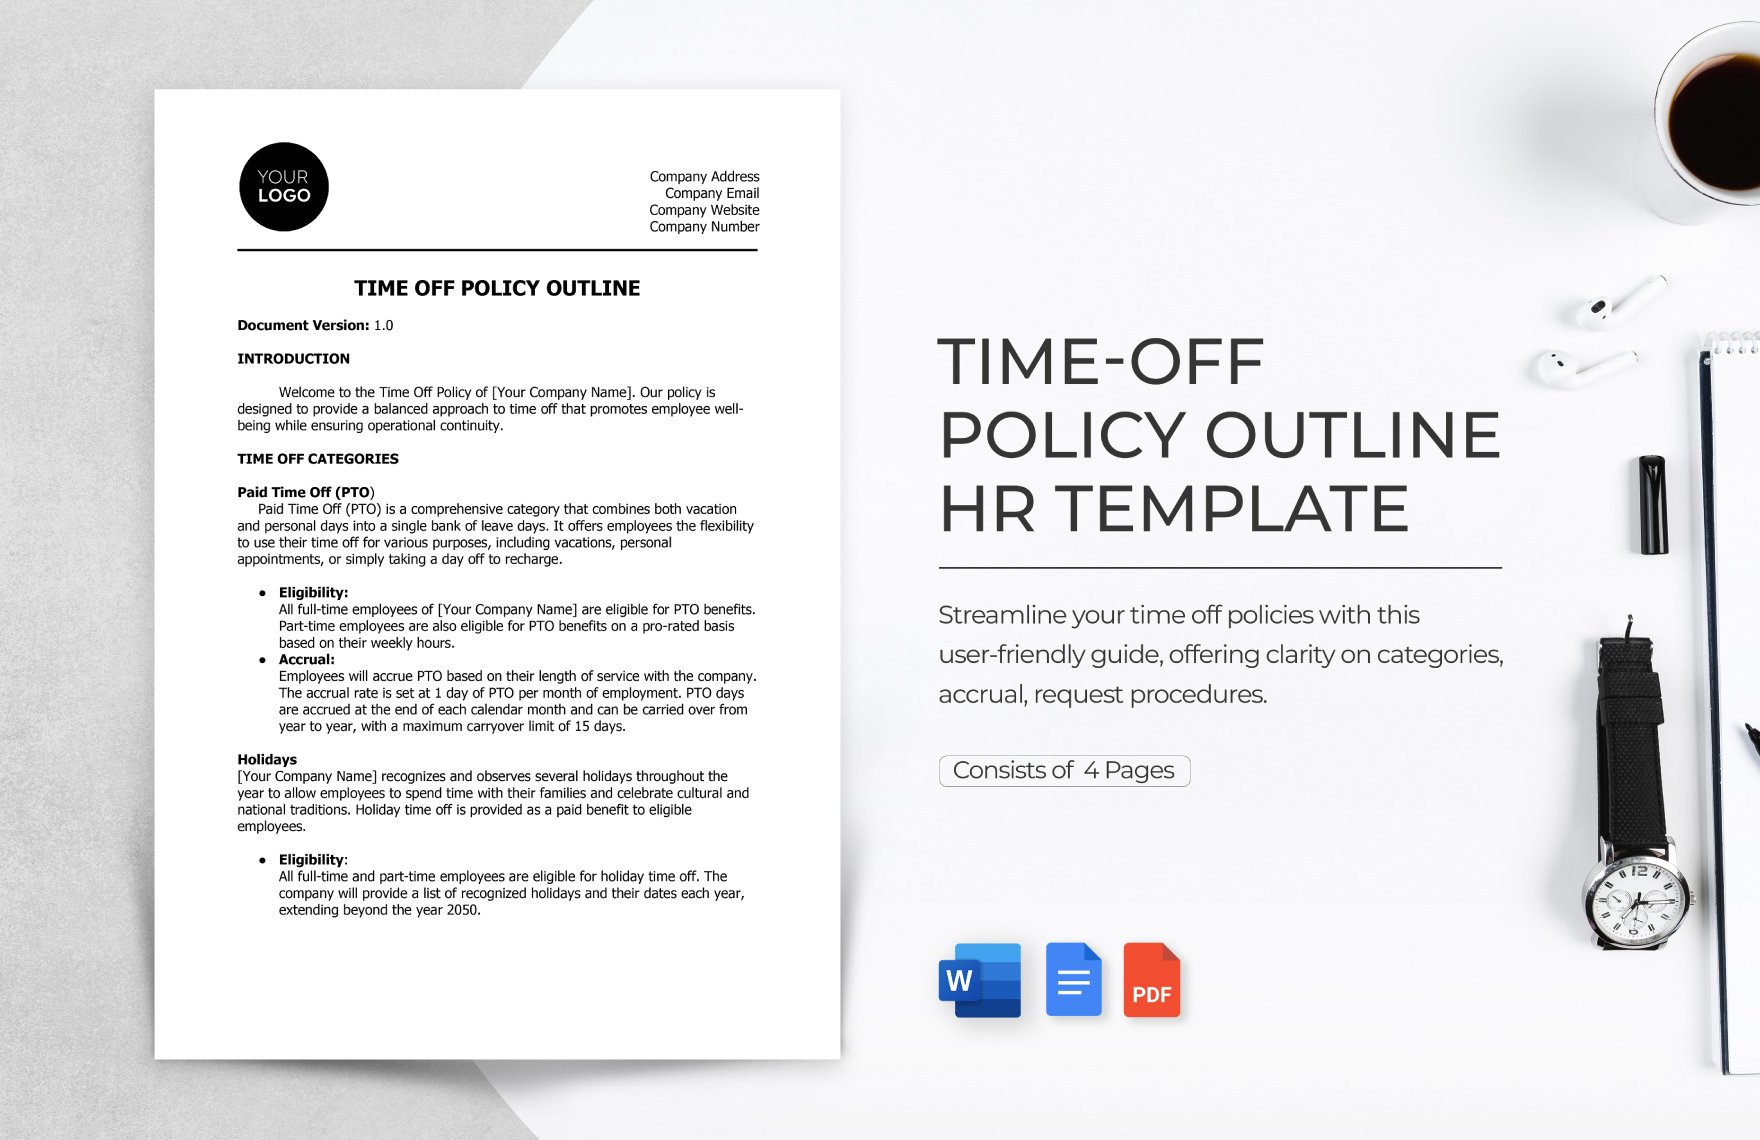 Time-Off Policy Outline HR Template in Word, Google Docs, PDF